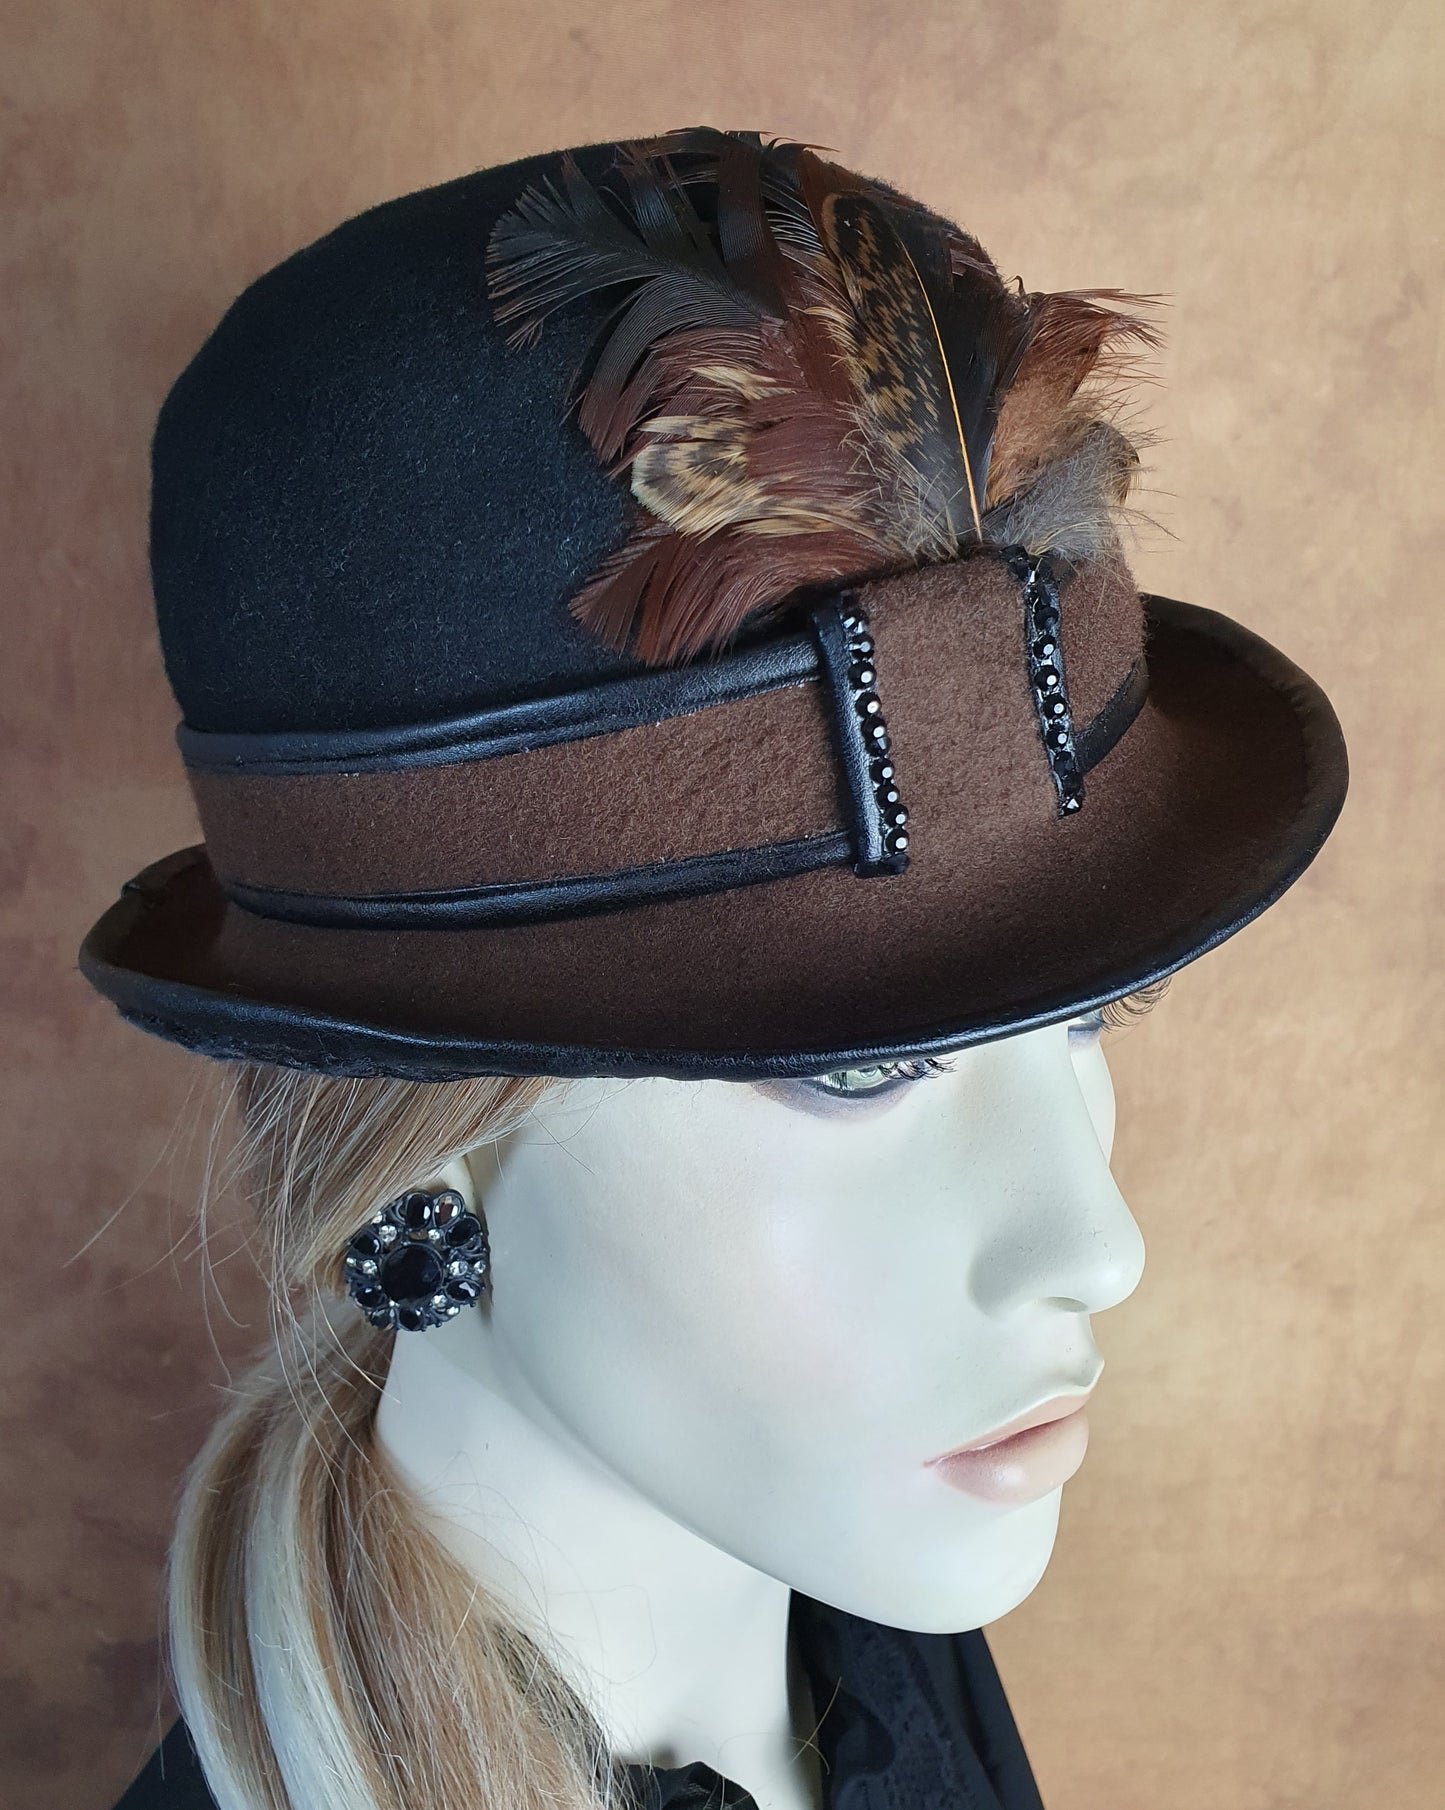 Handmade black and brown felt bowler hat with rooster feathers, ladies bowler hat, vintage bowler hat, derby hat, top hat for special events